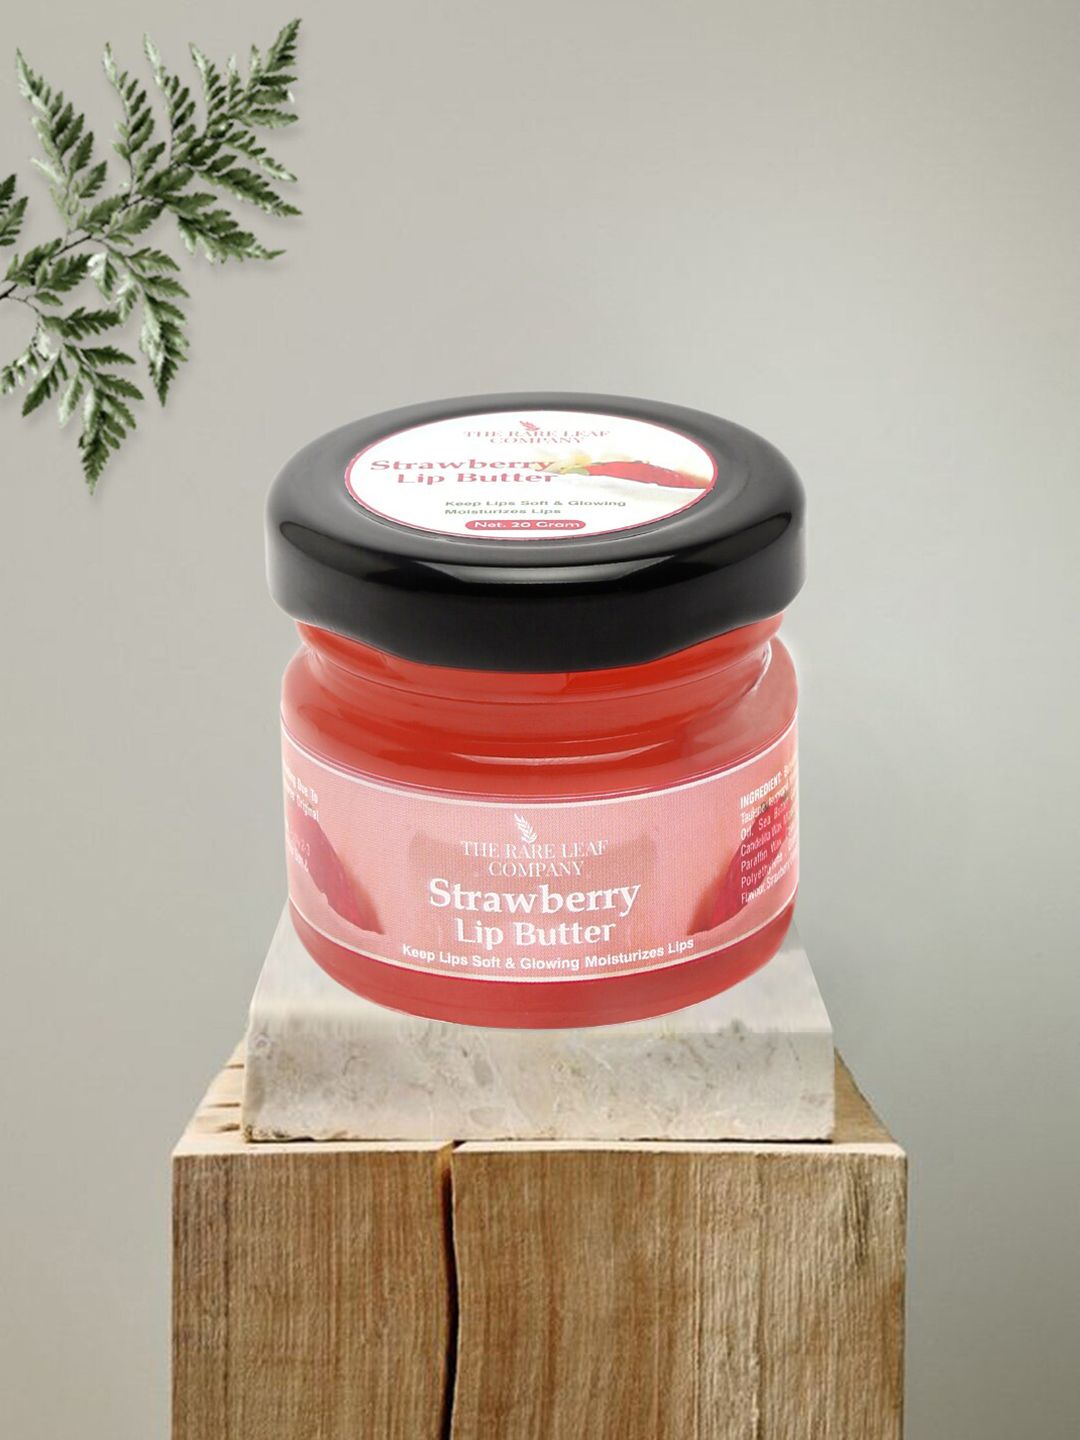 THE RARE LEAF COMPANY Natural UV Protection Lip Butter 20 g - Strawberry Price in India